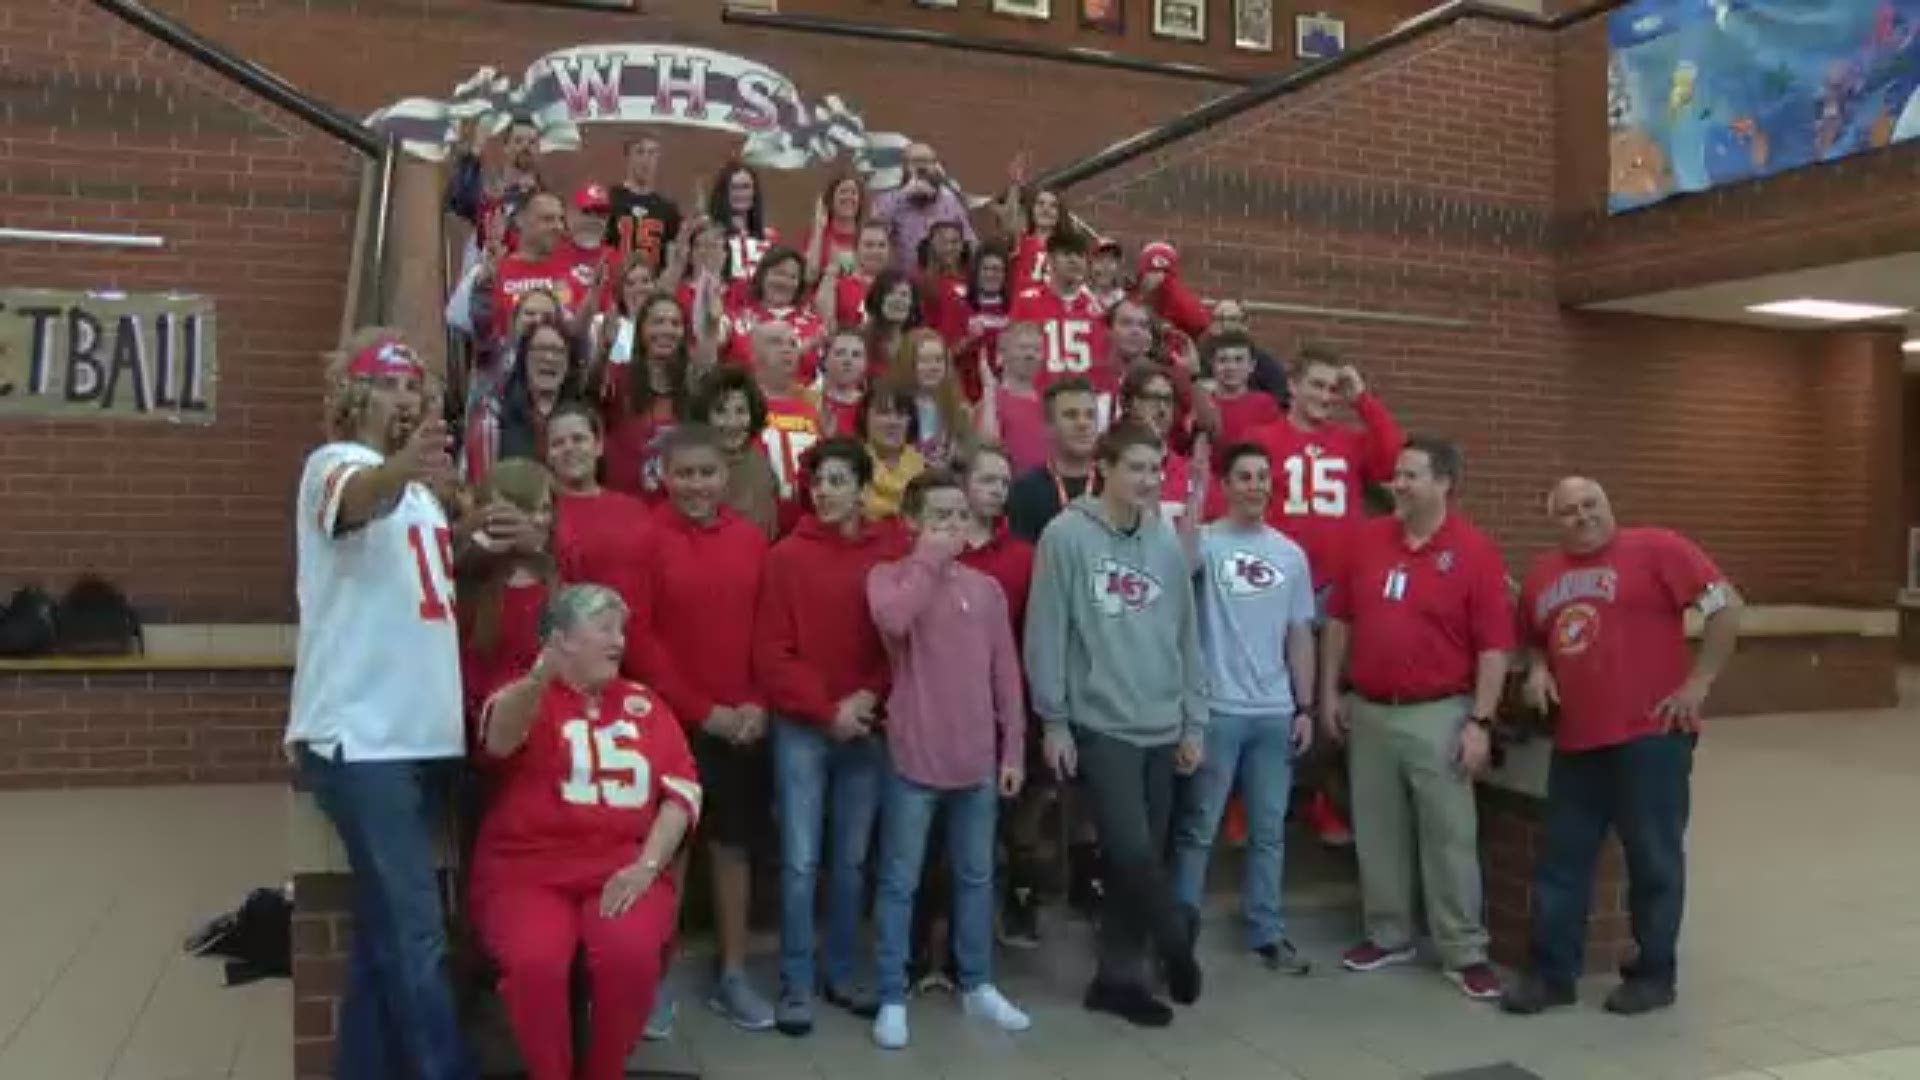 Students, staff and faculty wore Kansas City gear in honor of the Chief's quarterback.